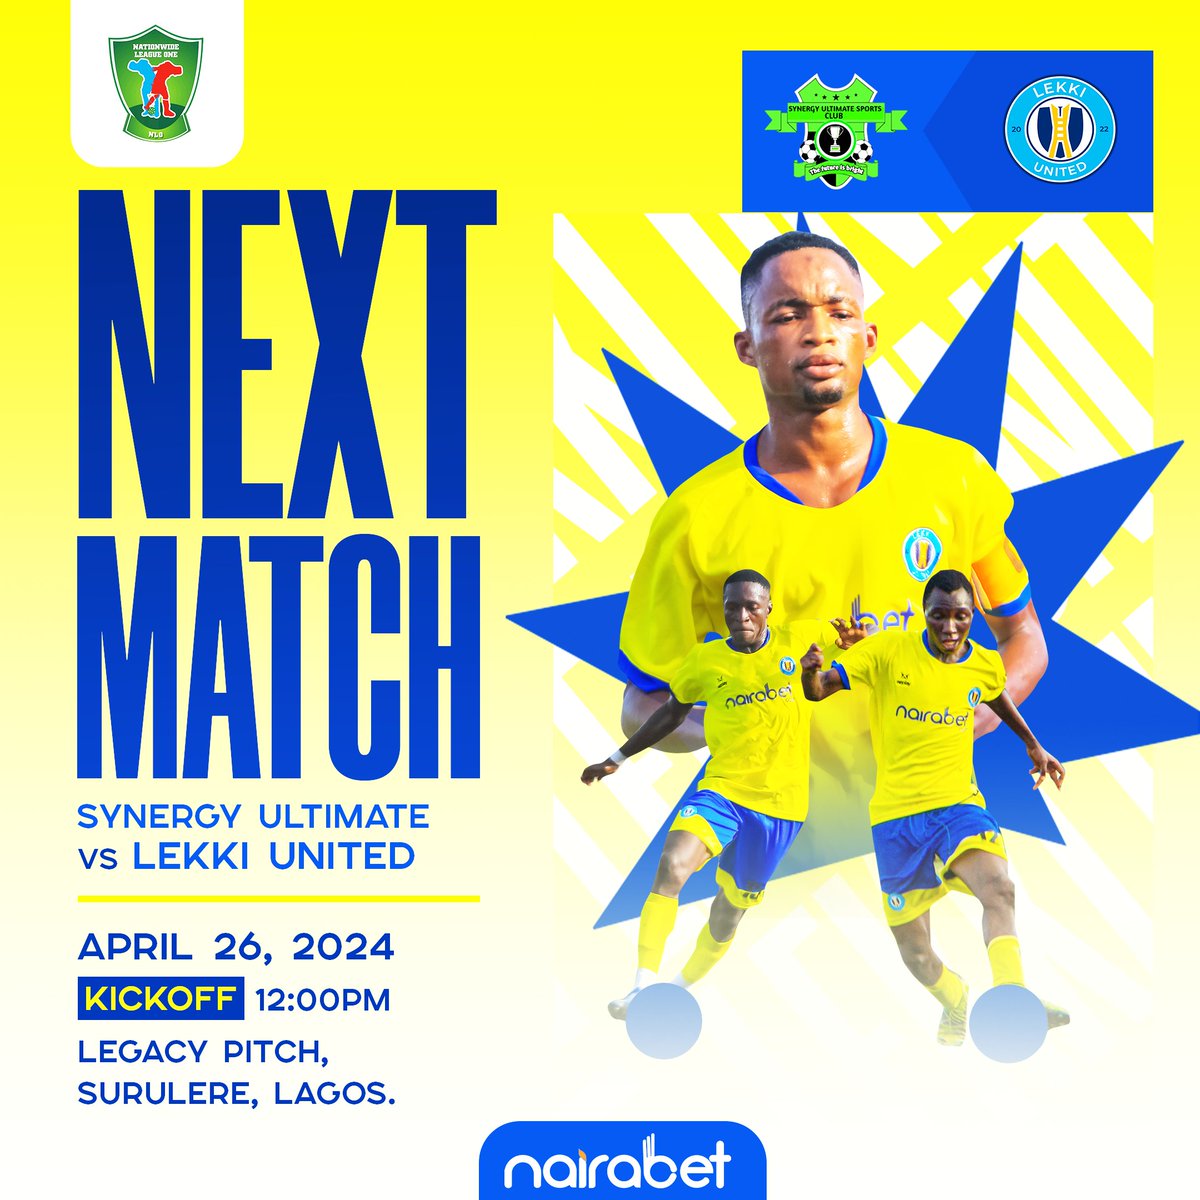 Up Next: We're ready to make it back-to-back wins.💥 Let's make it count 💪 🆚 Synergy Ultimate 🗓️Friday, 26th April 🏟️ Legacy Pitch, Lagos 🕒 12 p.m. #WeAreLekkiUnited #NLO24